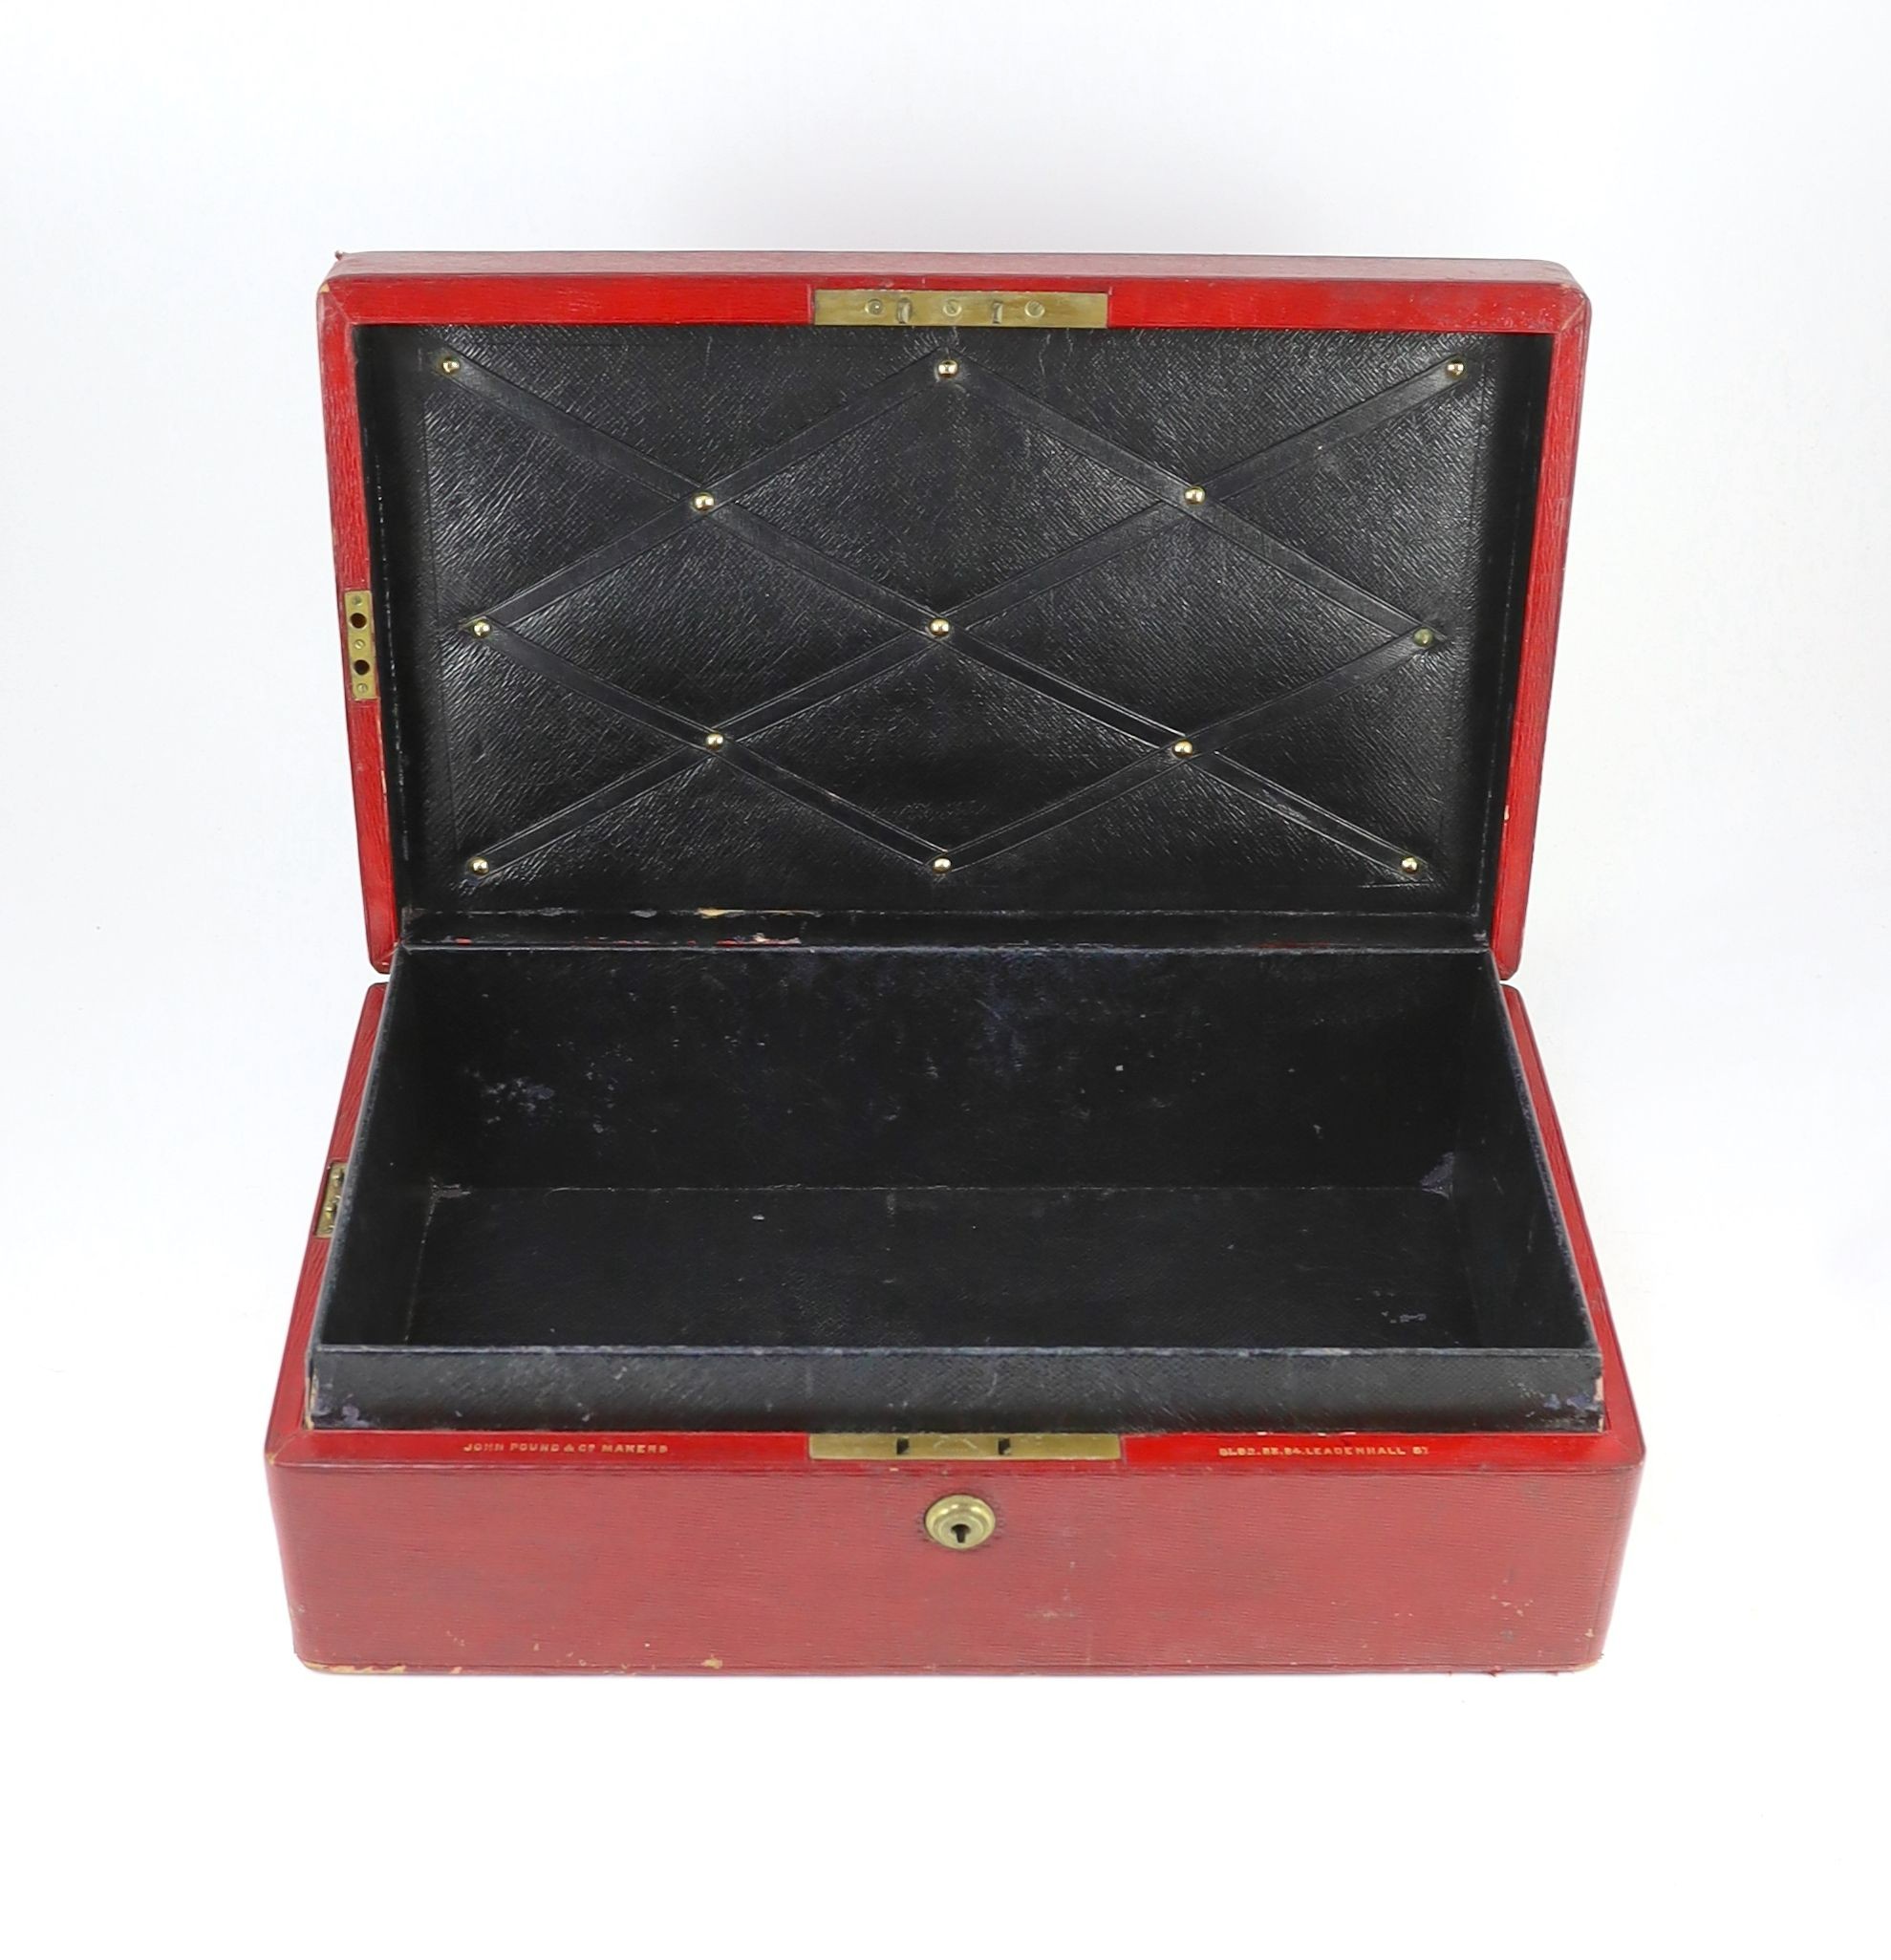 A Victorian red morocco despatch box, formerly the property of the Right Honourable Viscount Cross GCBGCSI, width 46cm, depth 28cm, height 15cm